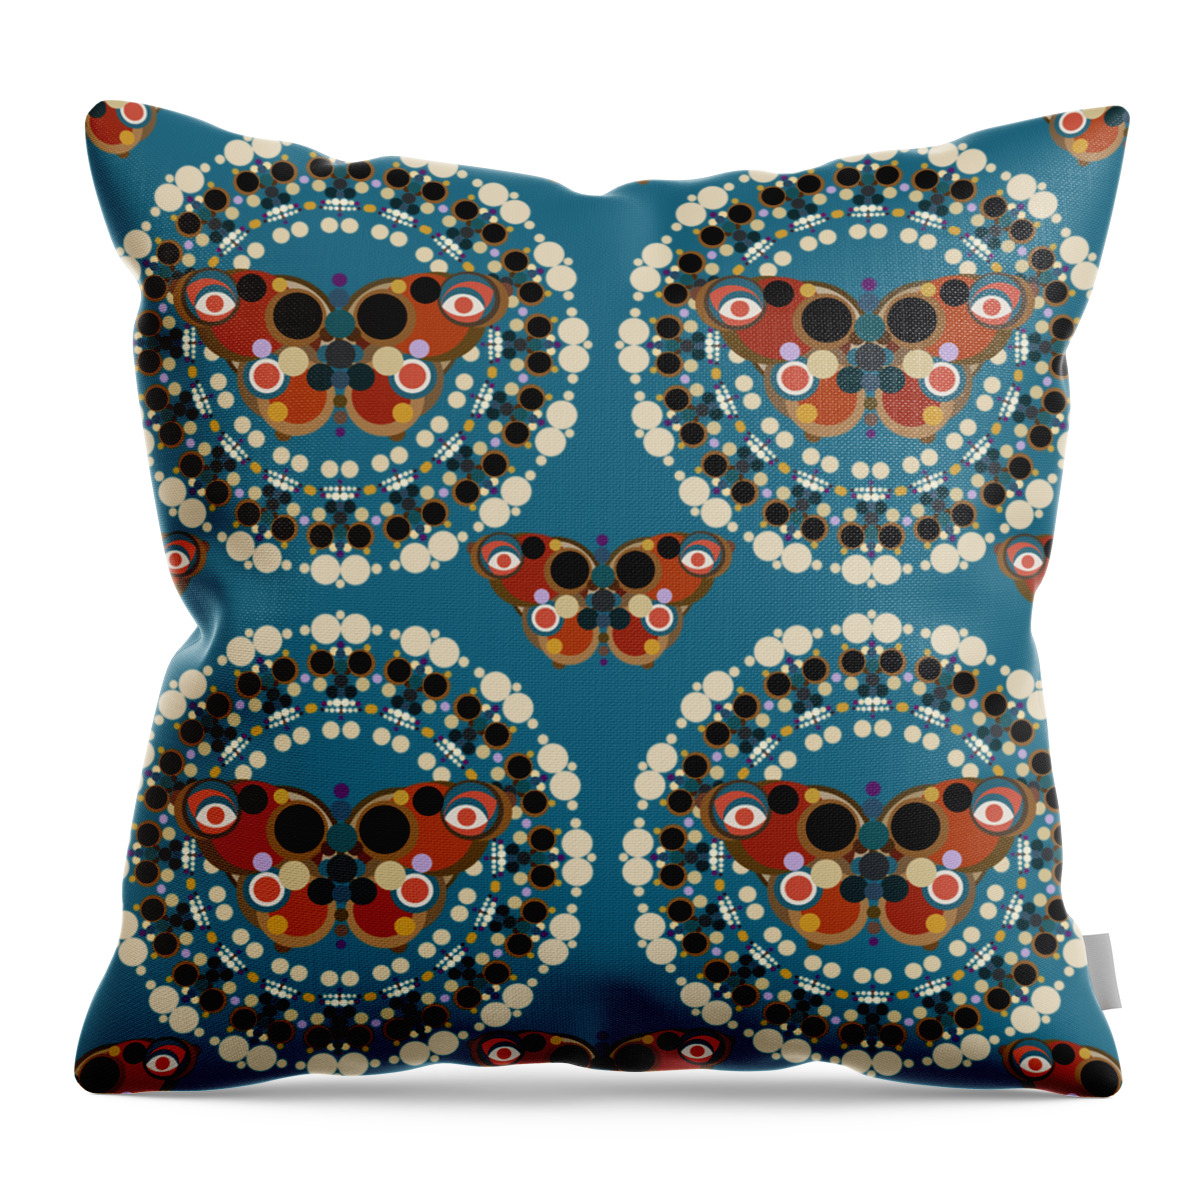 Surreal Throw Pillow featuring the mixed media Skulls Flowers Butterflies by BFA Prints